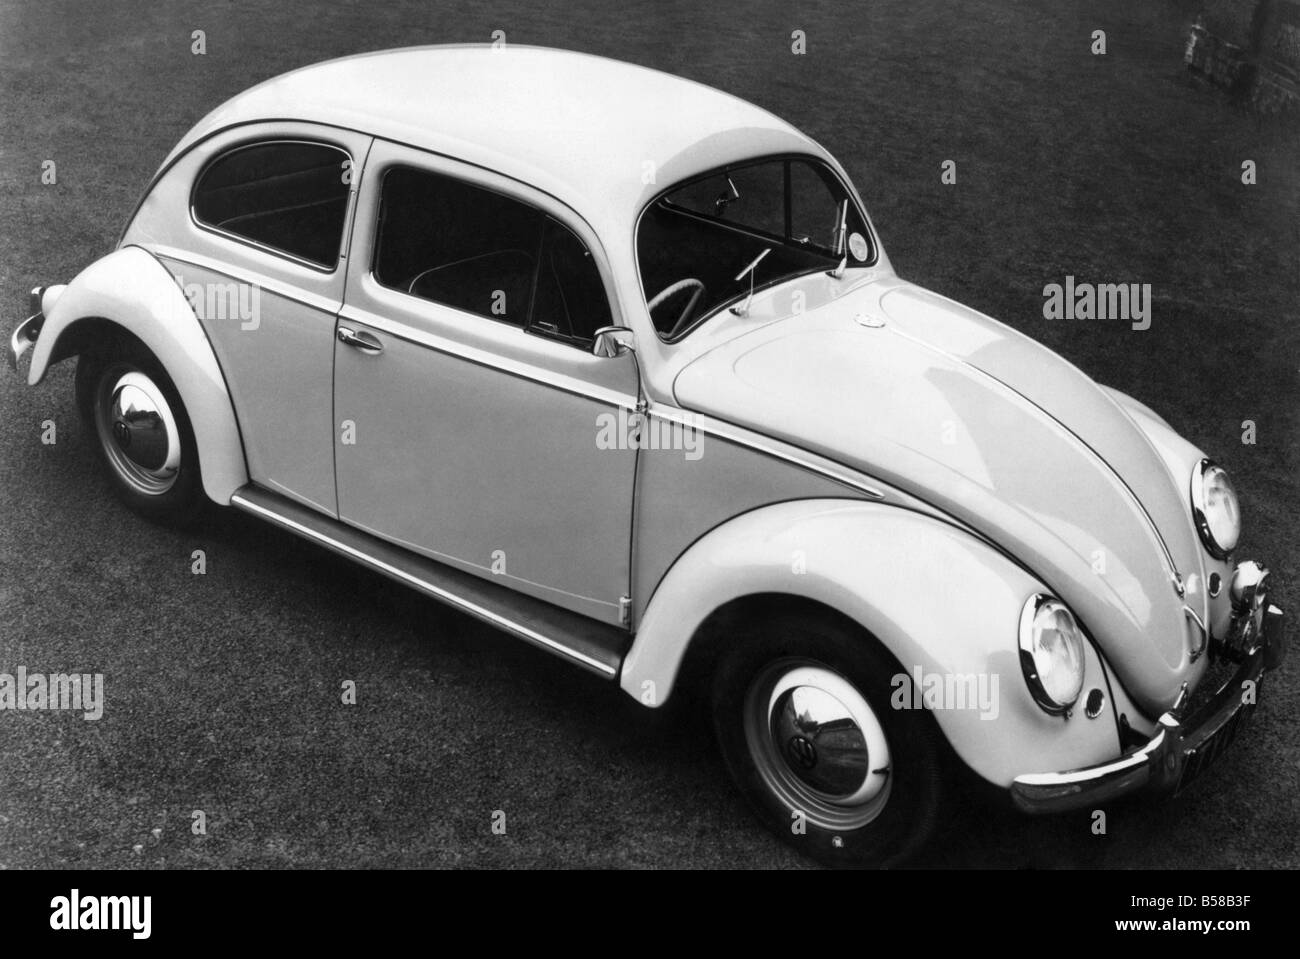 VW Beetle, this is the familiar outline of the volkswagen. April 1959 P005855 Stock Photo